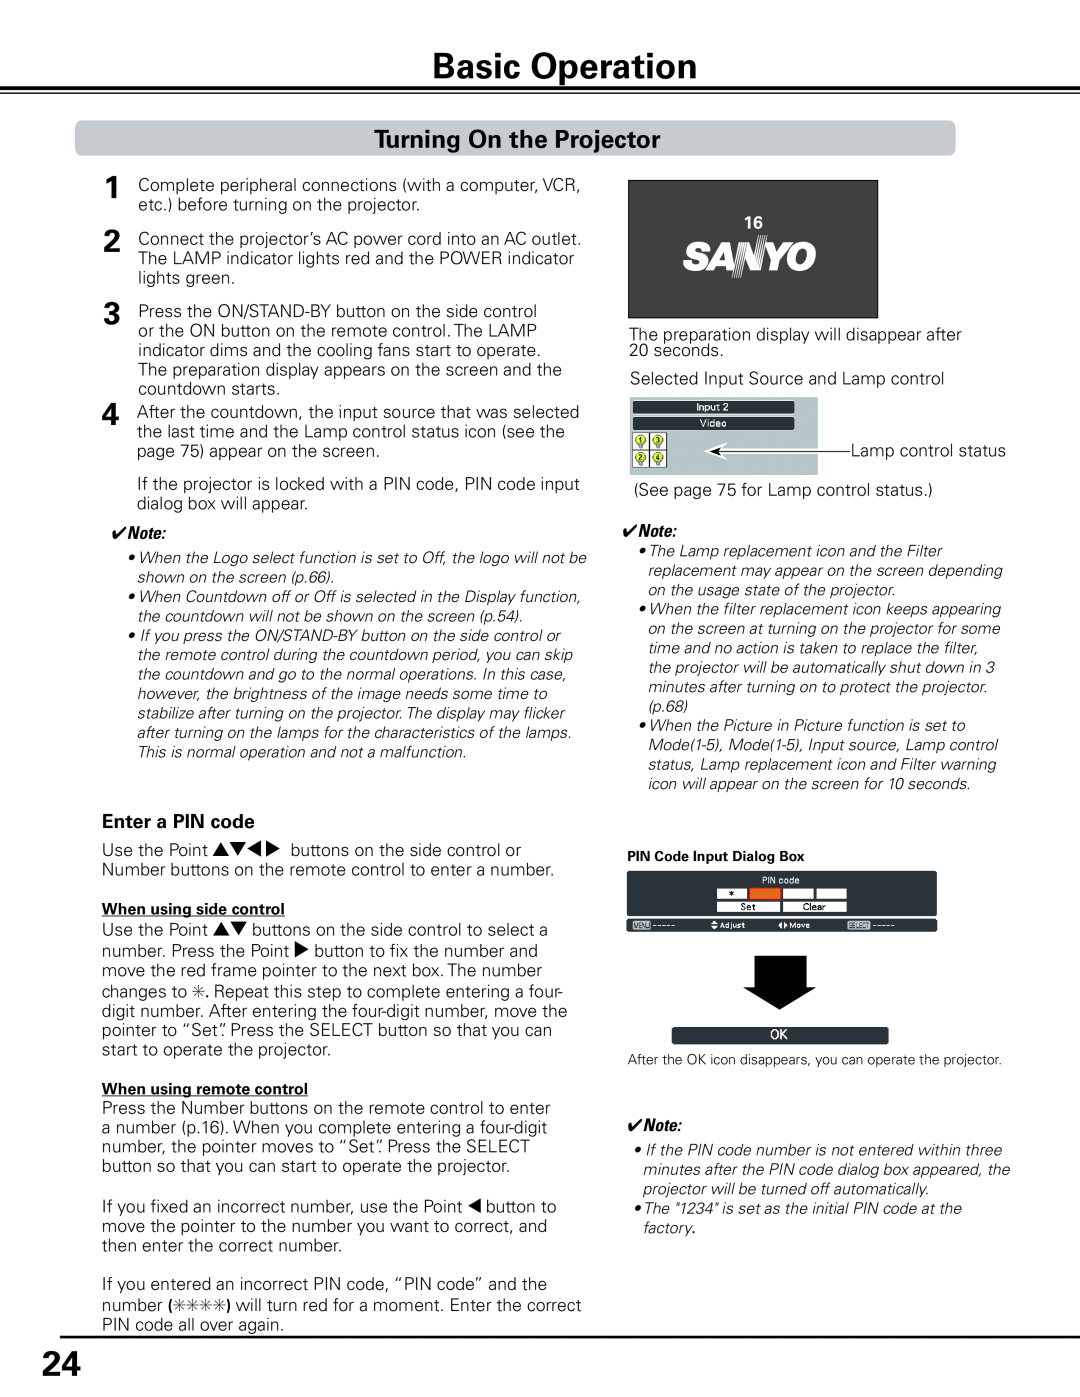 Sanyo HF15000L owner manual Basic Operation, Turning On the Projector, Enter a PIN code 